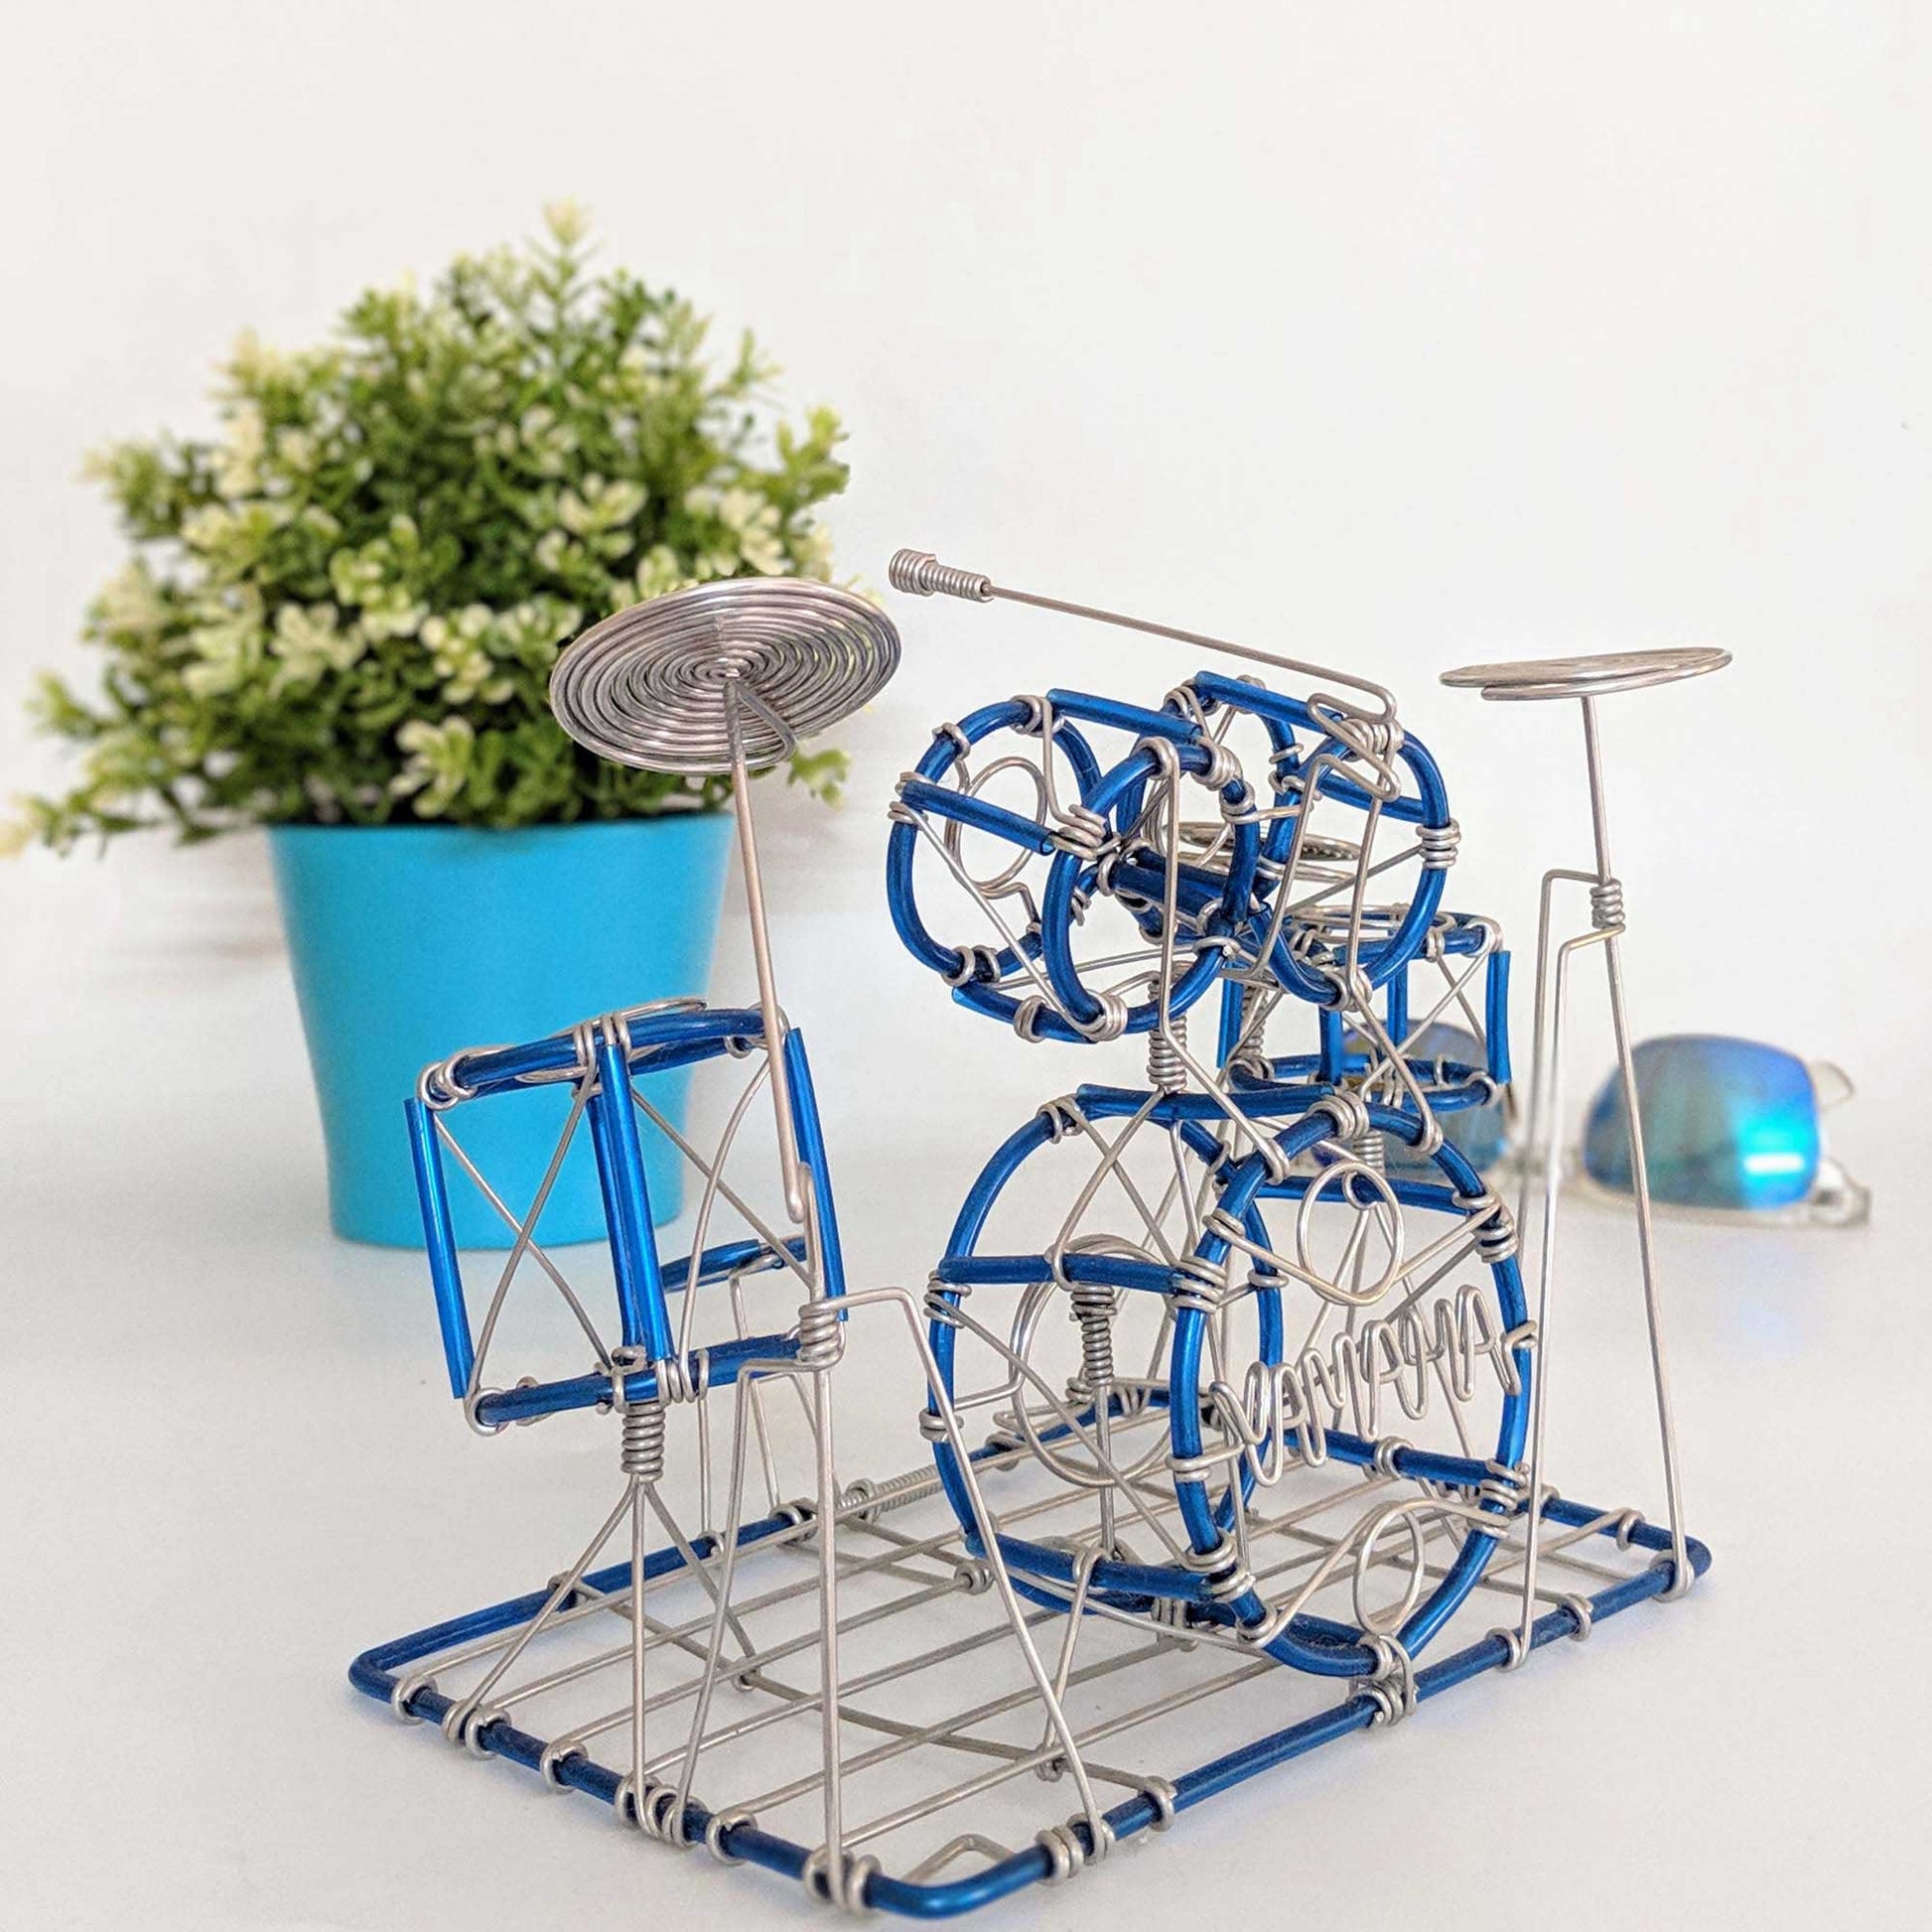 Miniature Wire Art Drumset hand-crafted from aluminium wire